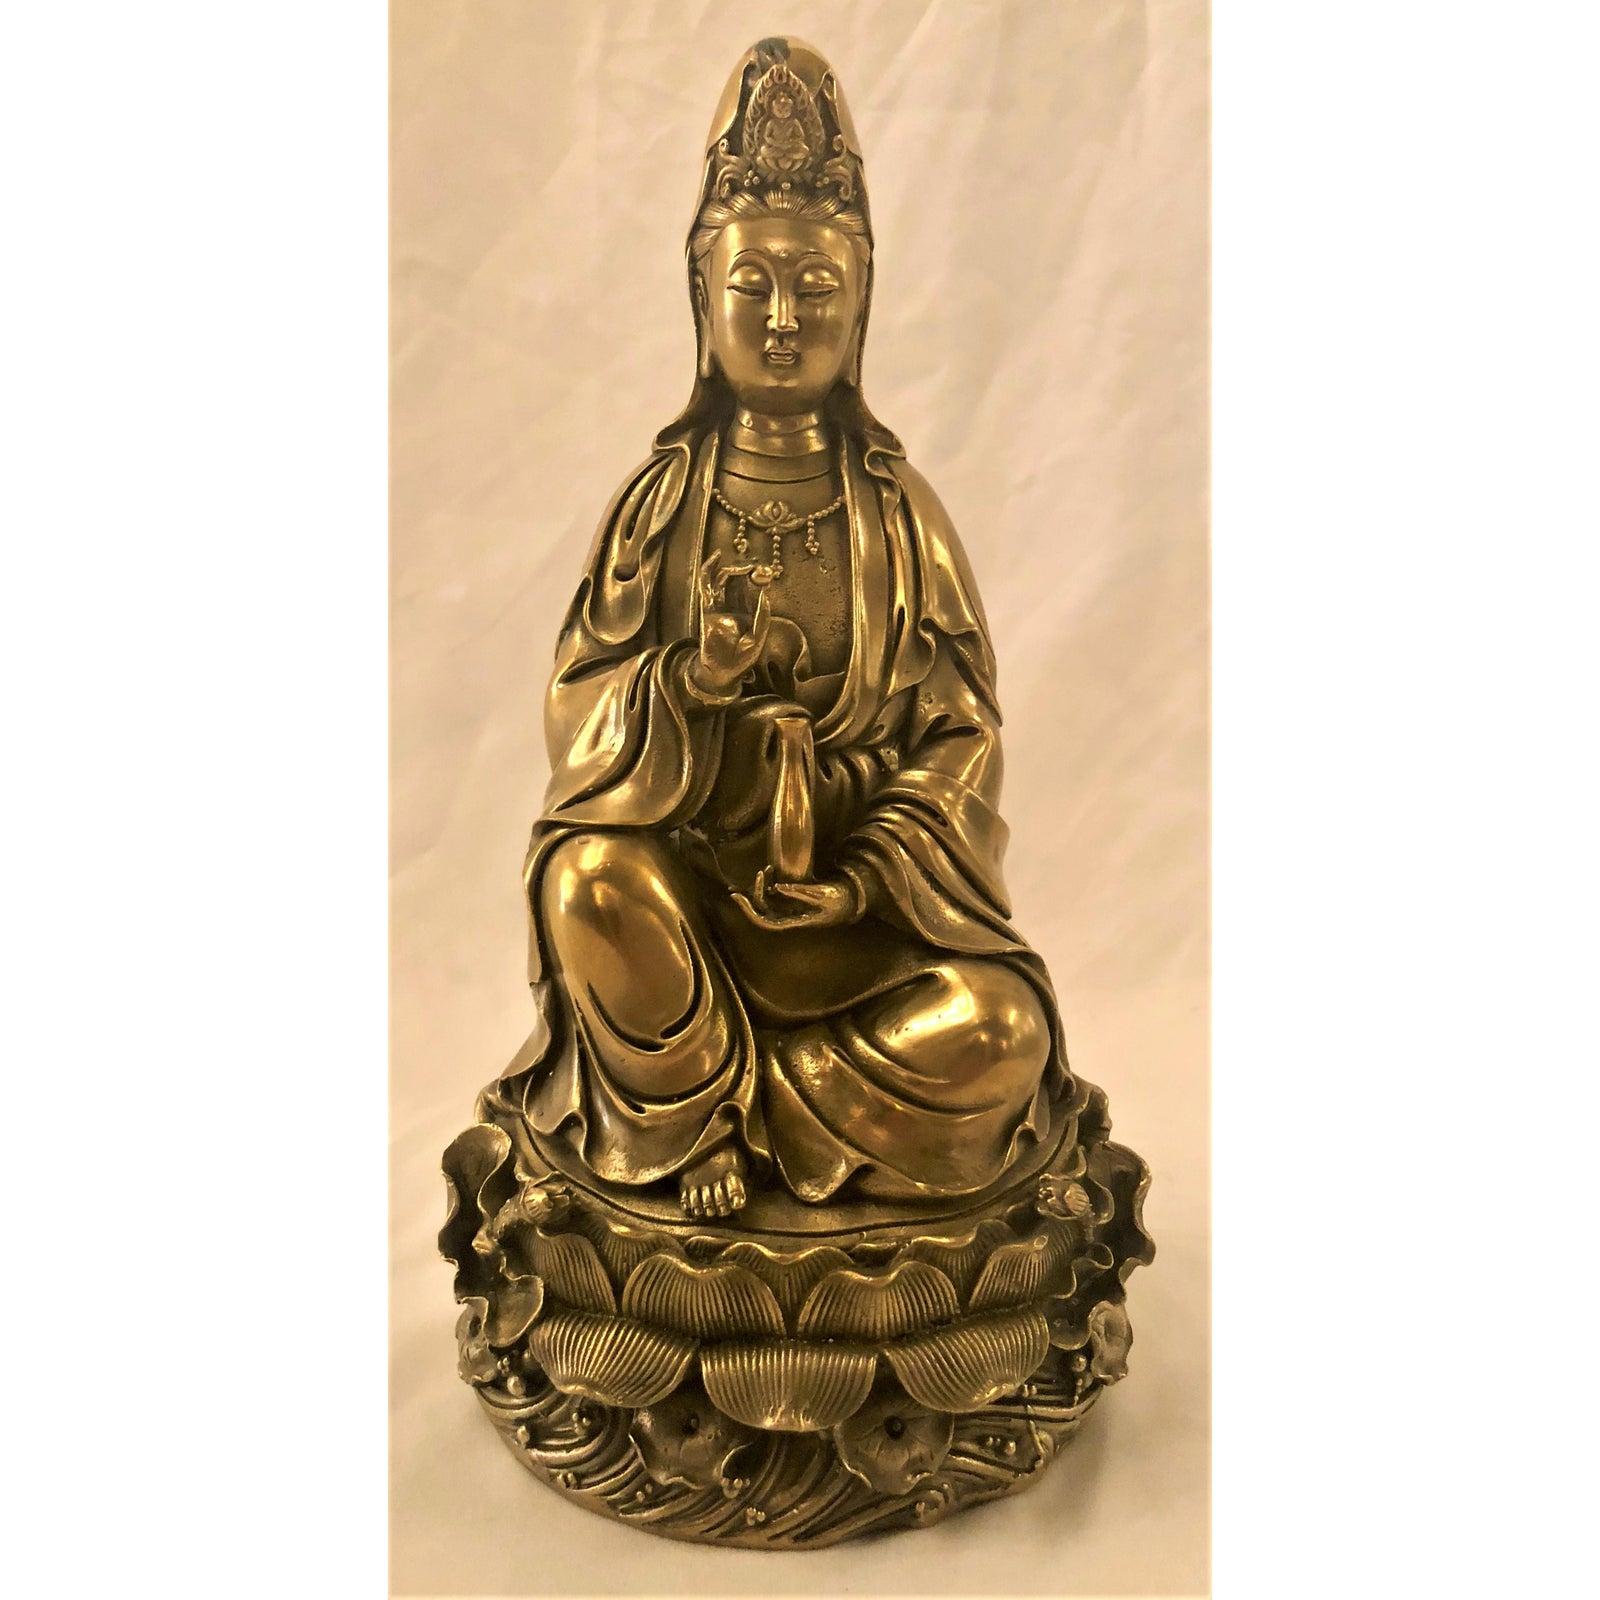 Antique Chinese 19th century bronze statue of Kuan Yin, Goddess of compassion. A lovely little bronze piece.
 